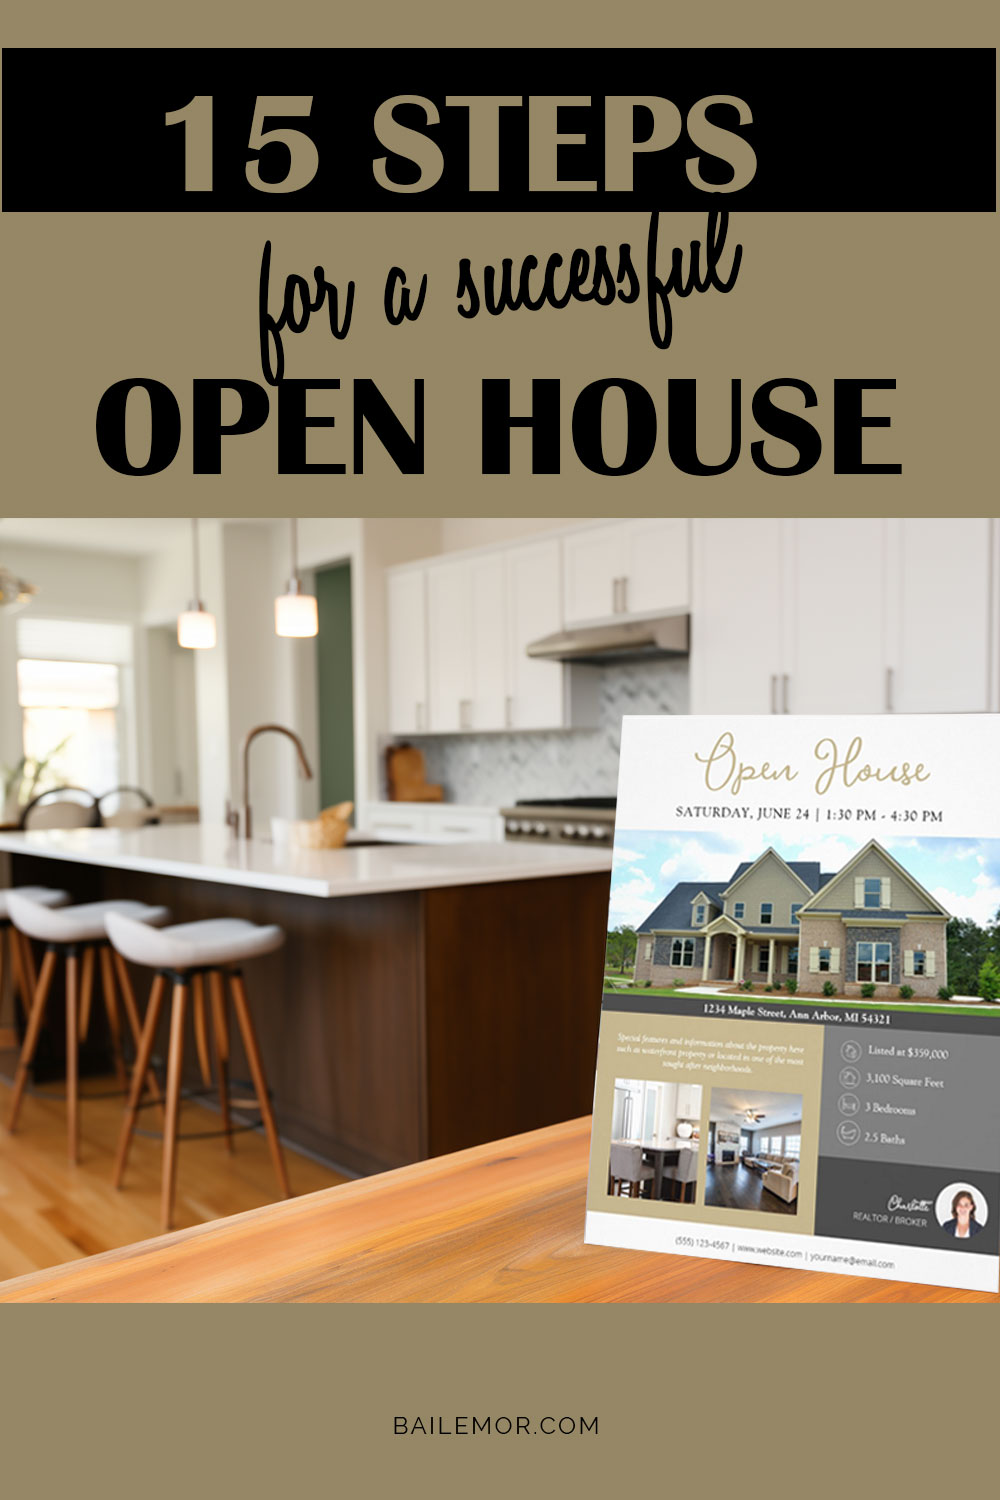 15 Real Estate Open House Tips